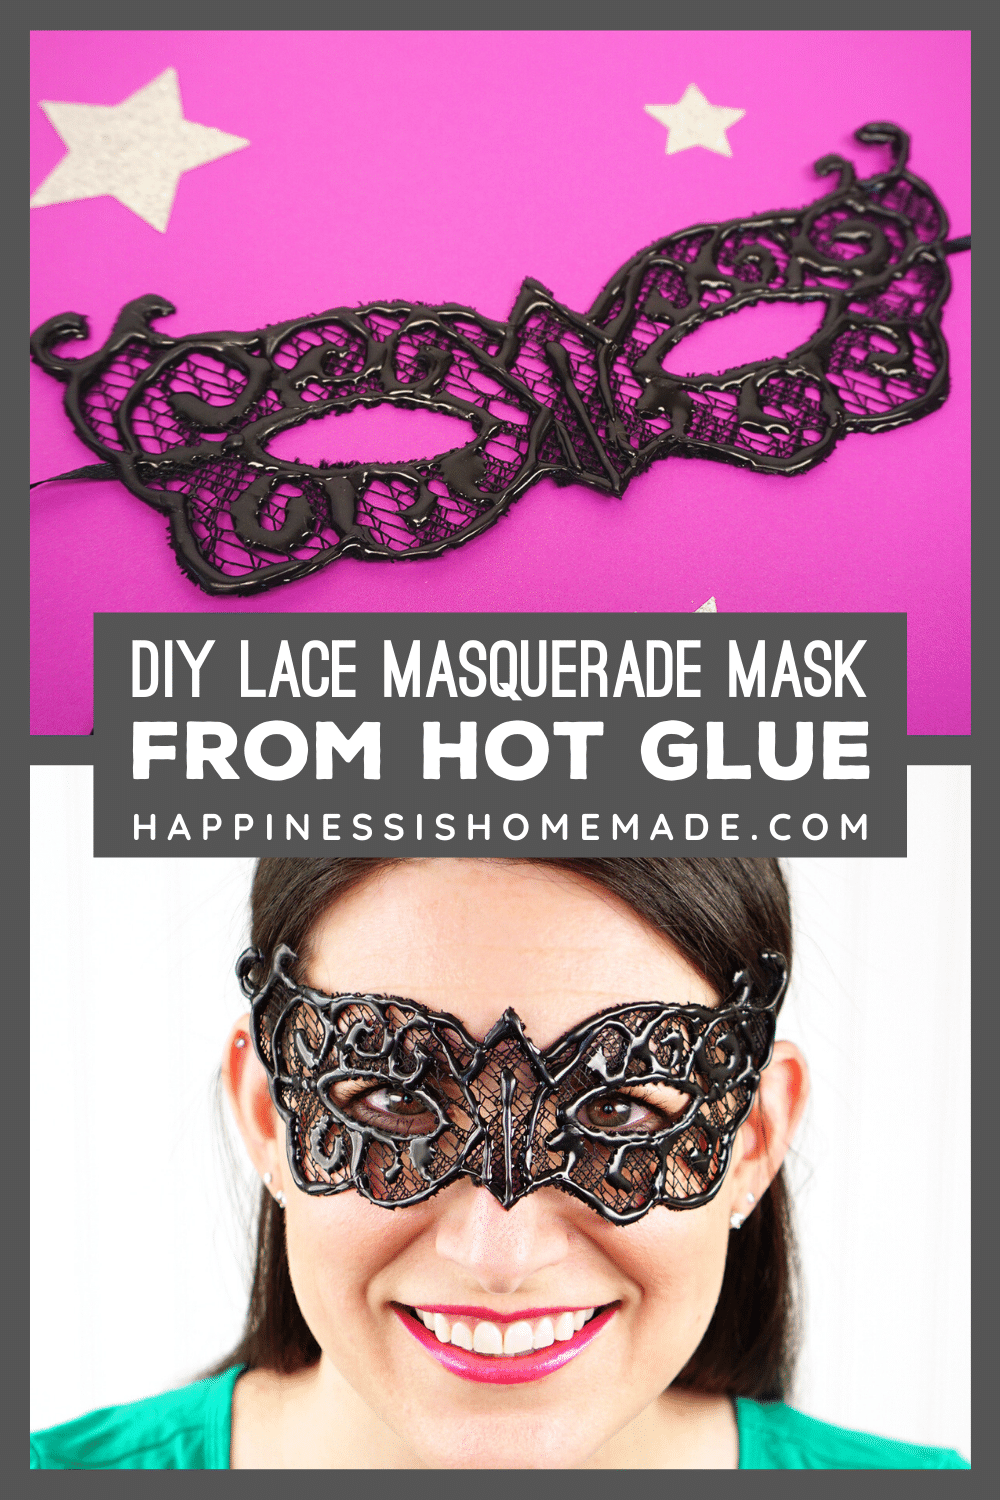 DIY lace masquerade mask from hot glue